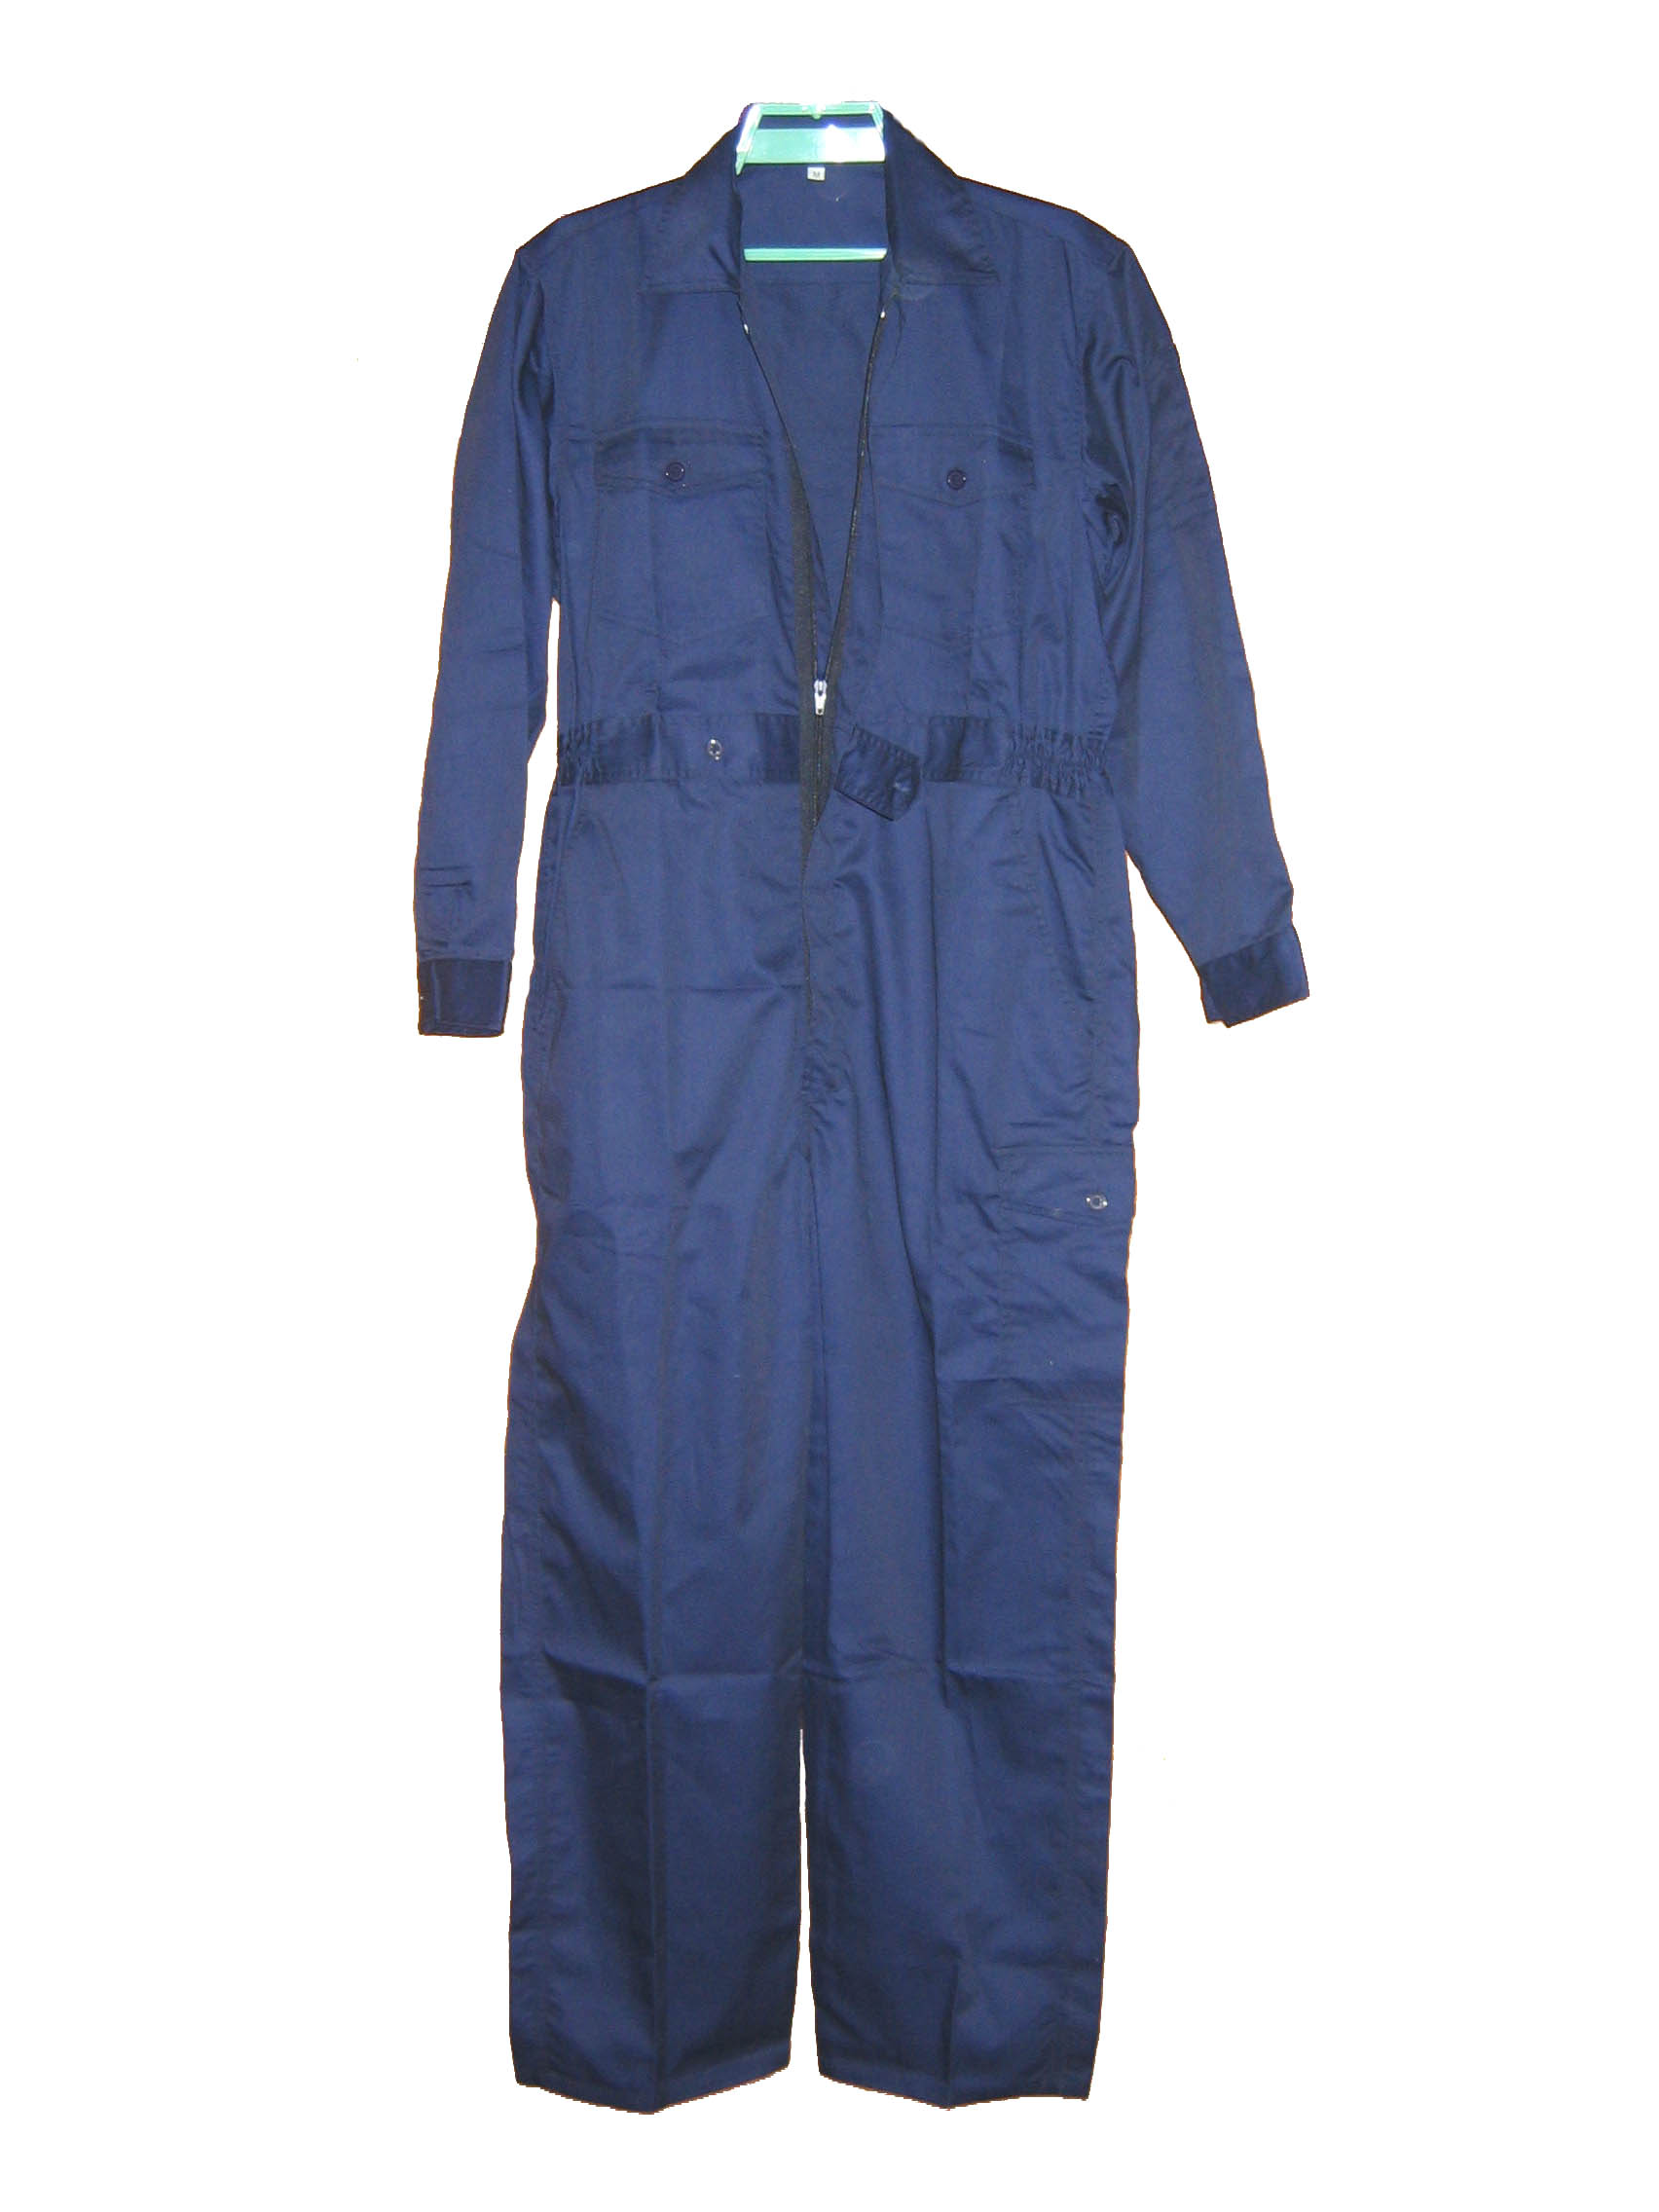 Navy blue one piece work garments coverall